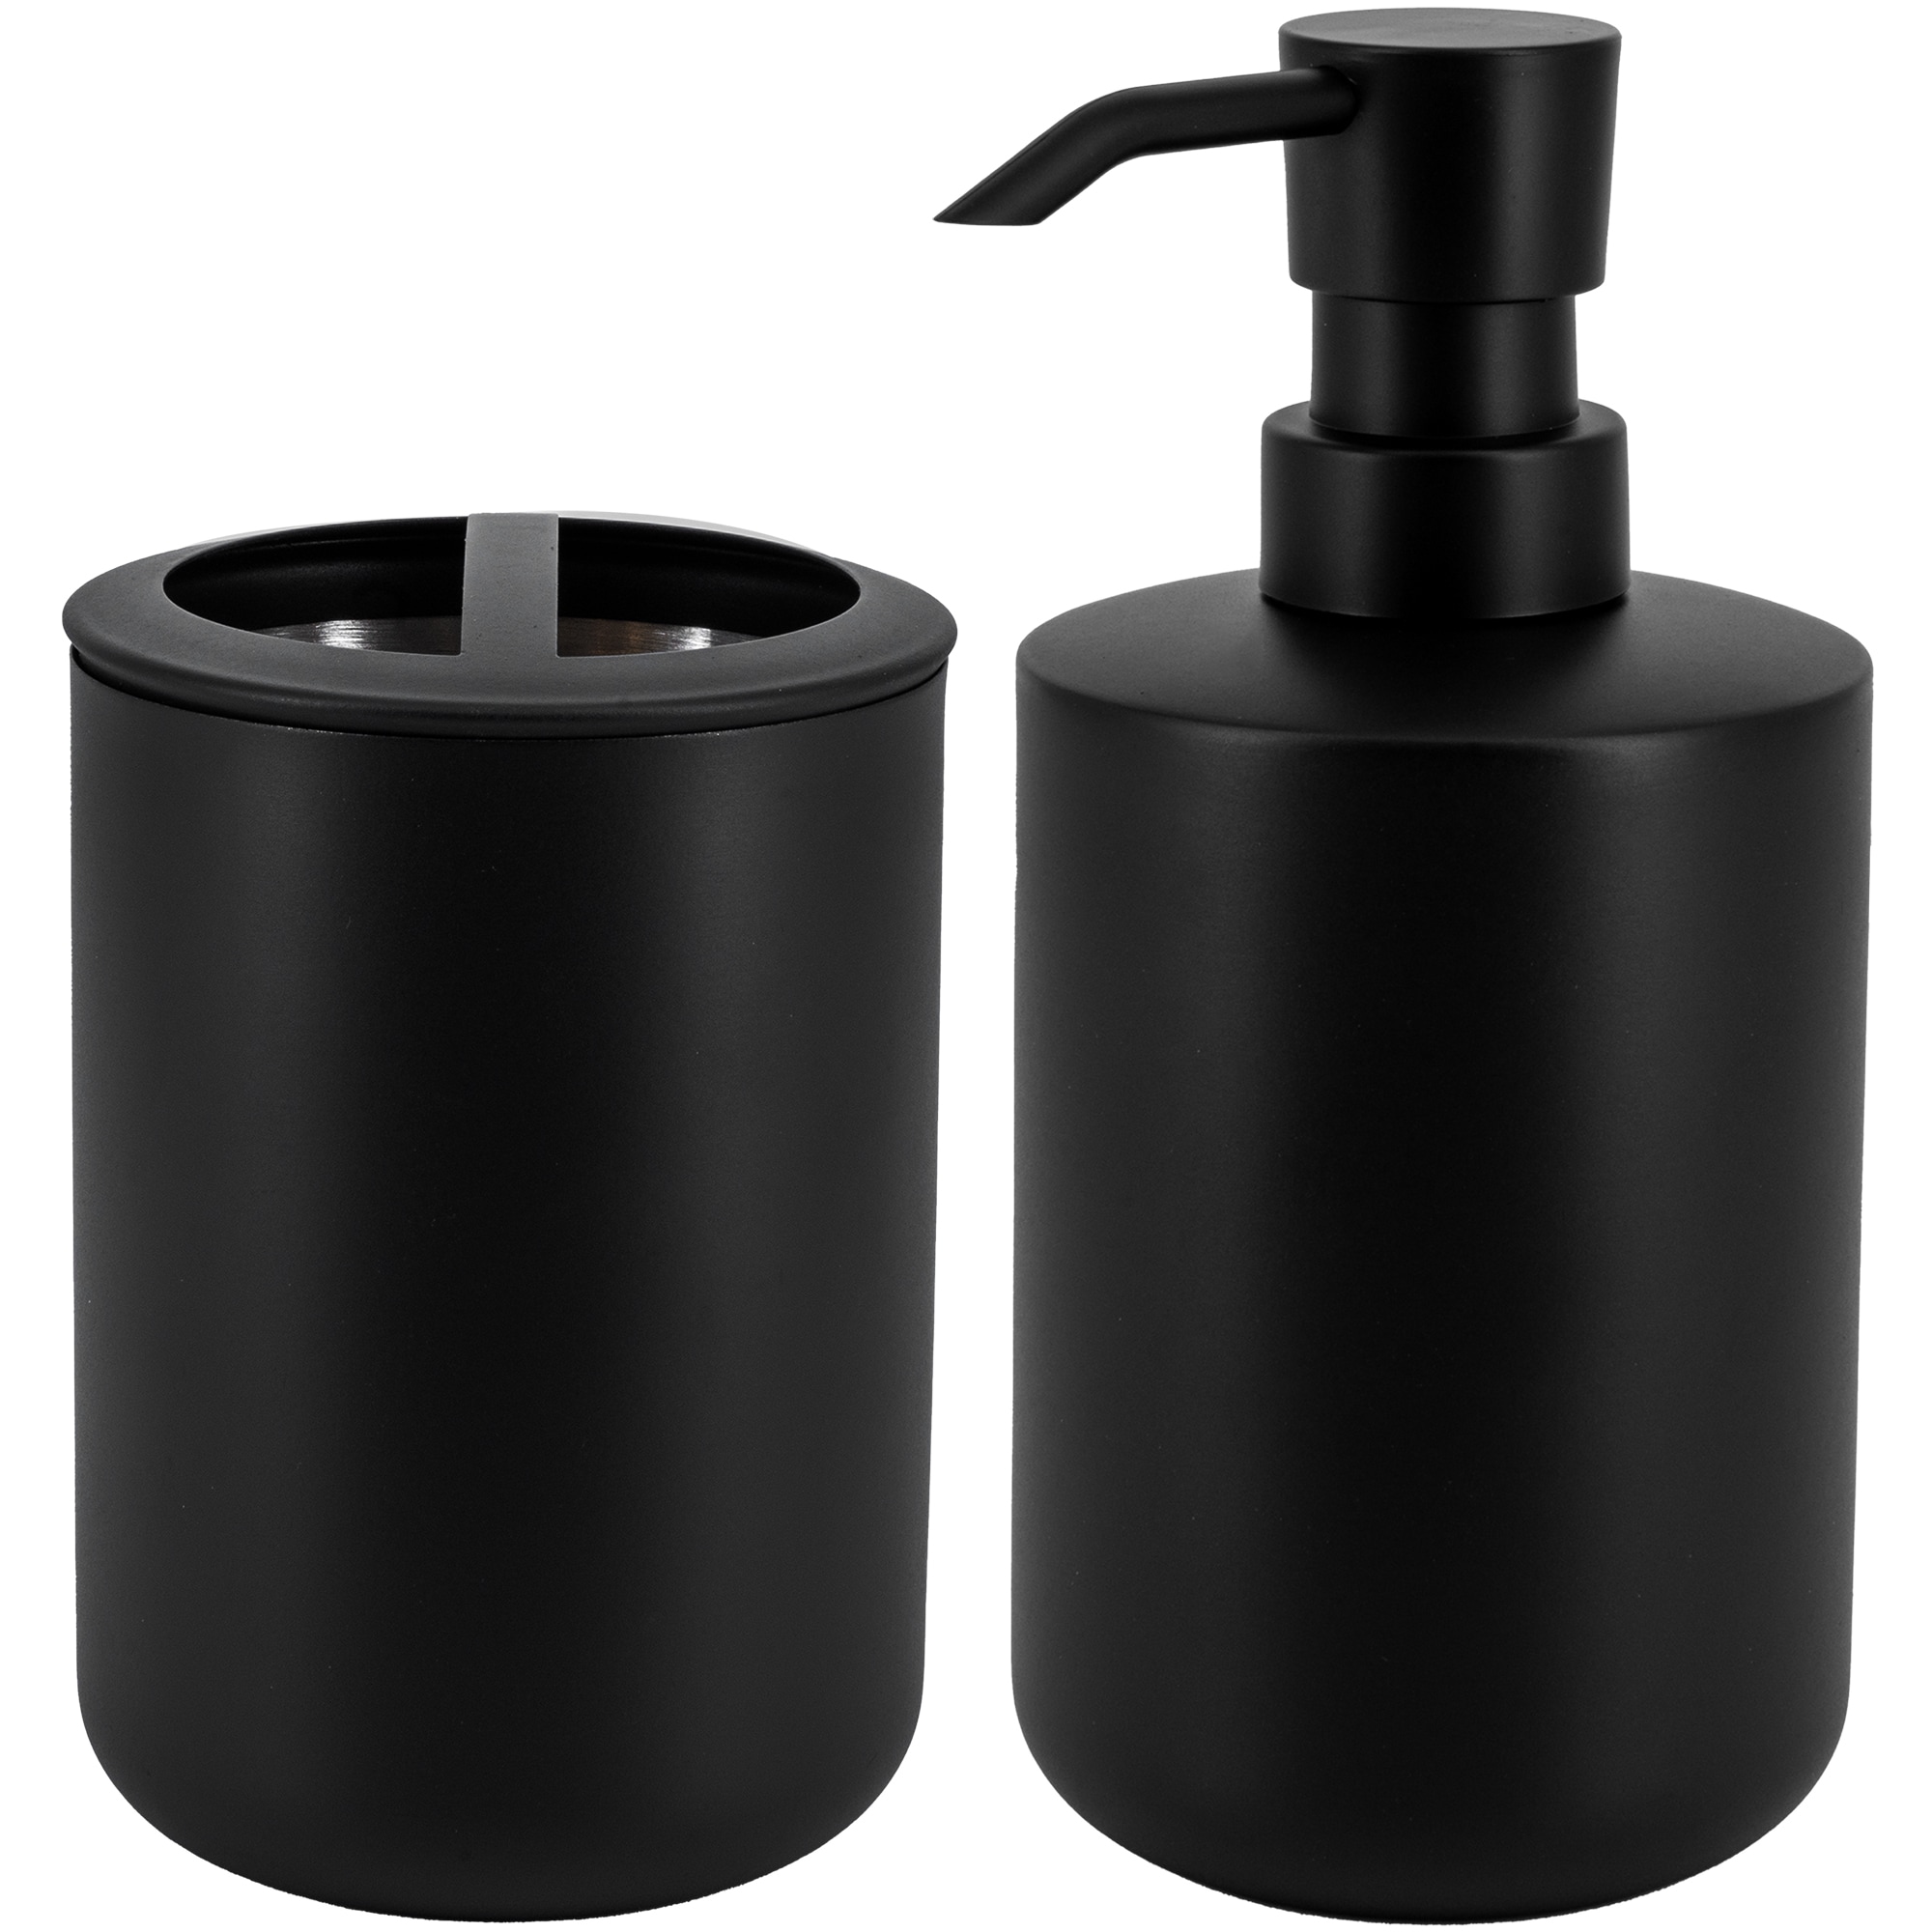 OXO Steel-stainless 15-oz Capacity Deck-mount Soap and Lotion